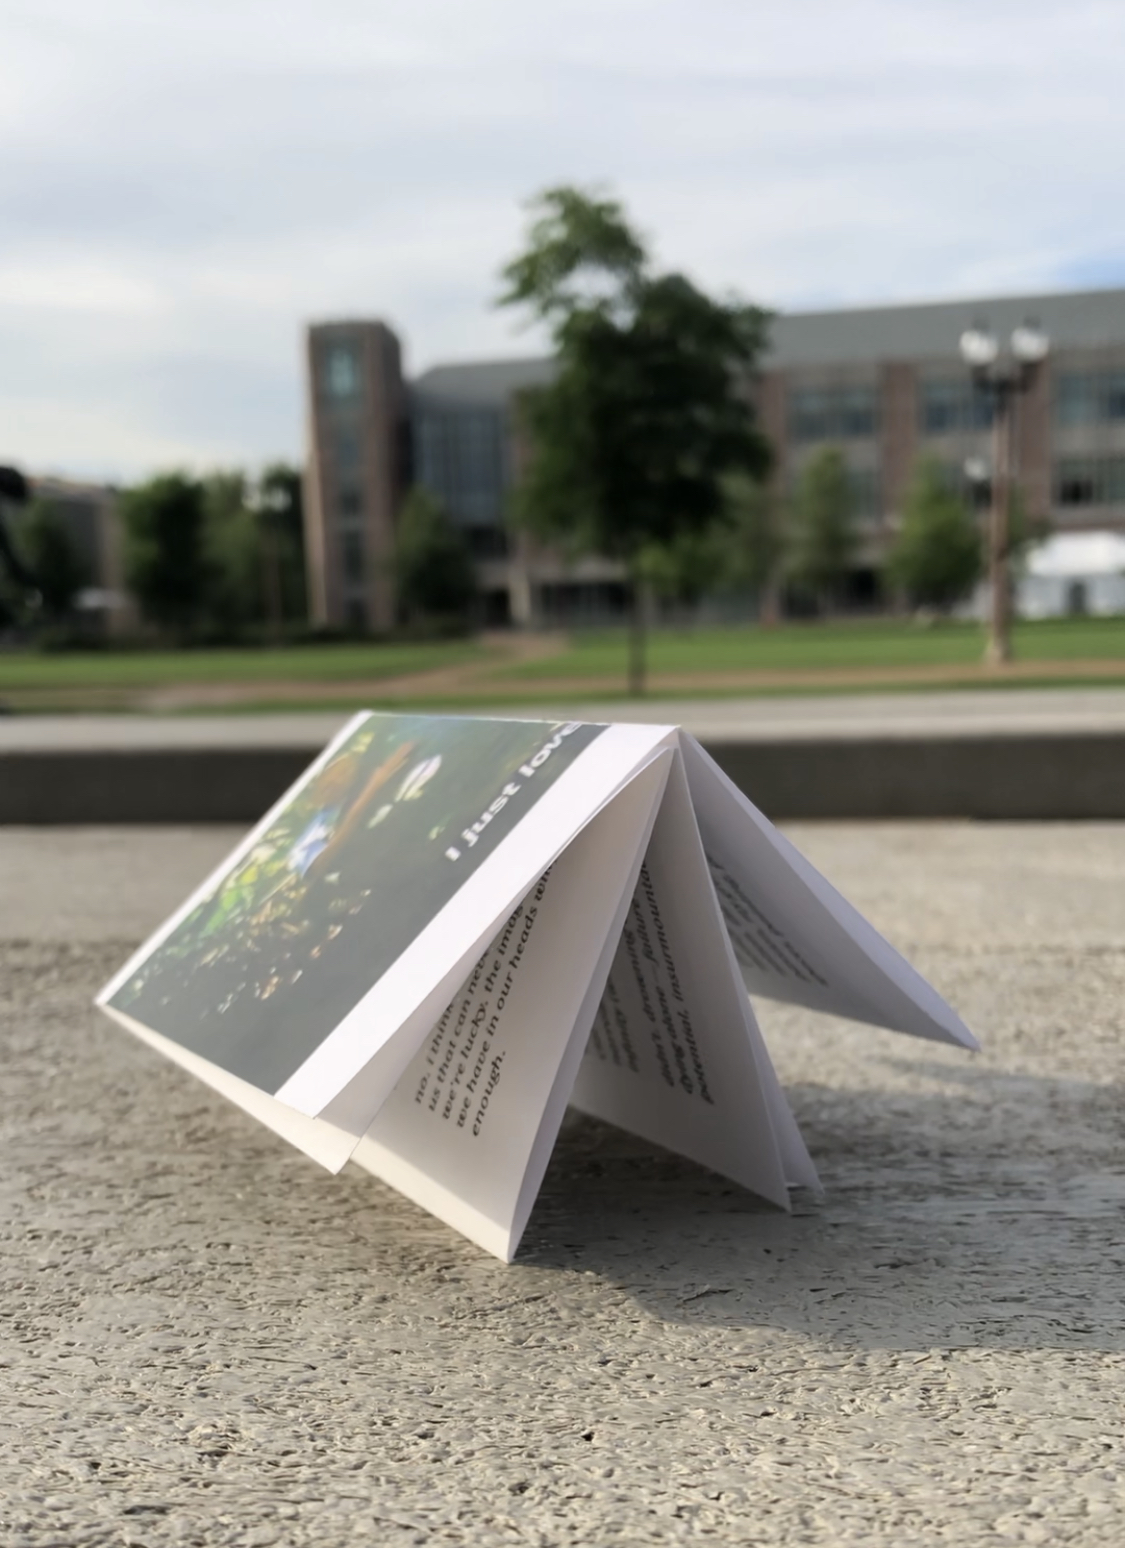 a small folded booklet perched on its pages to resemble a house; it's placed on a gray surface. in the distance are trees and school buildings, against an overcast sky.